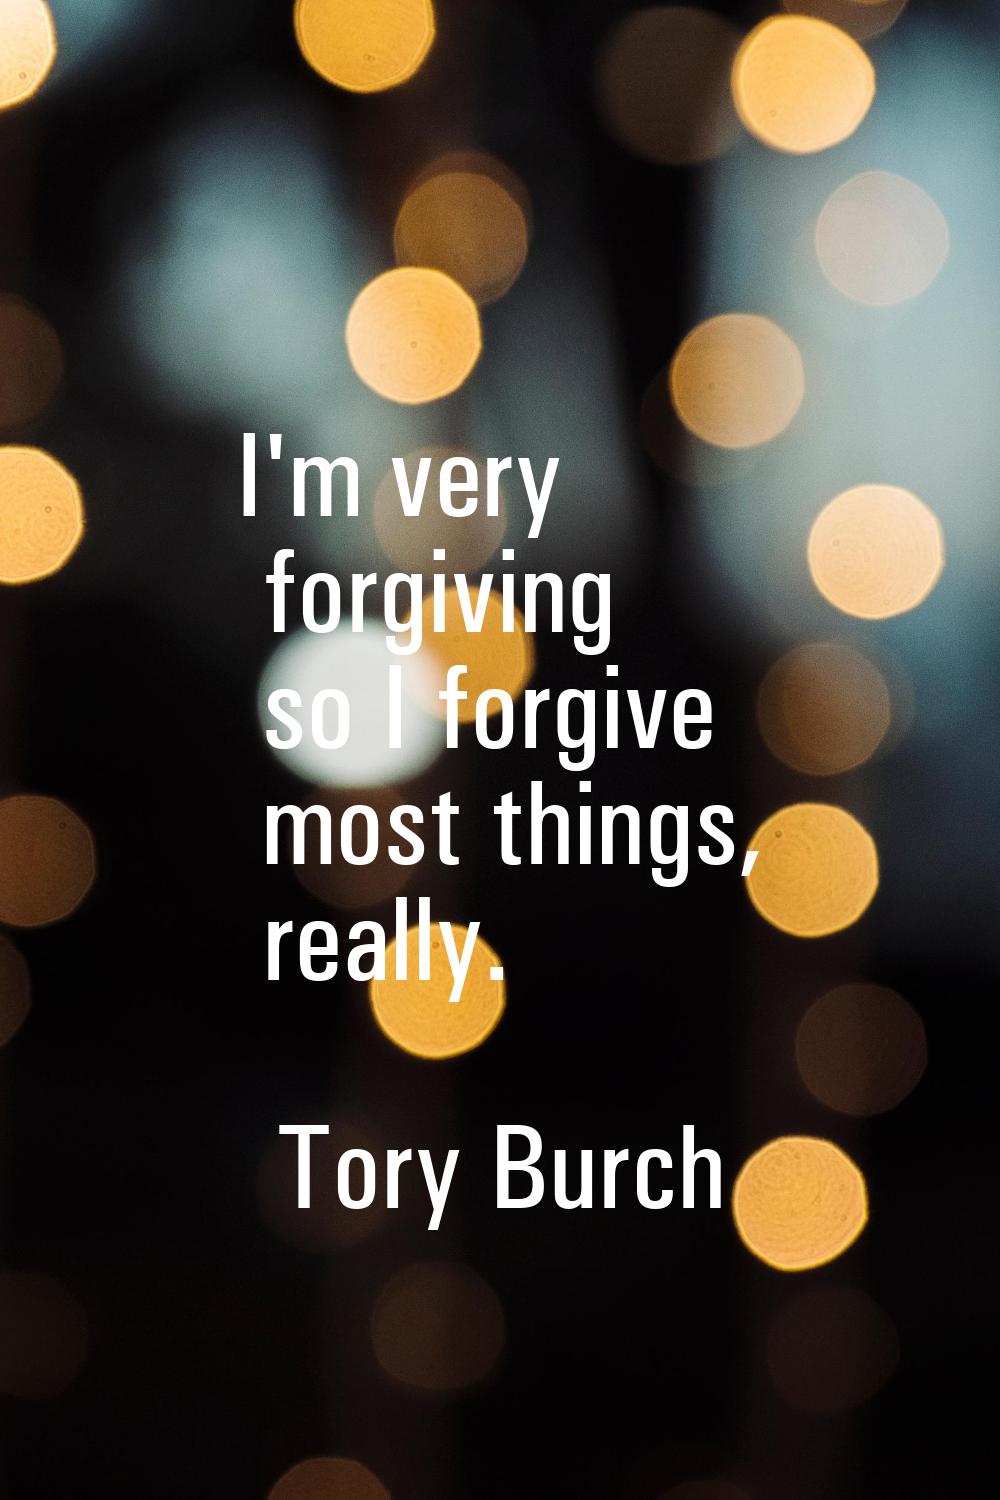 I'm very forgiving so I forgive most things, really.